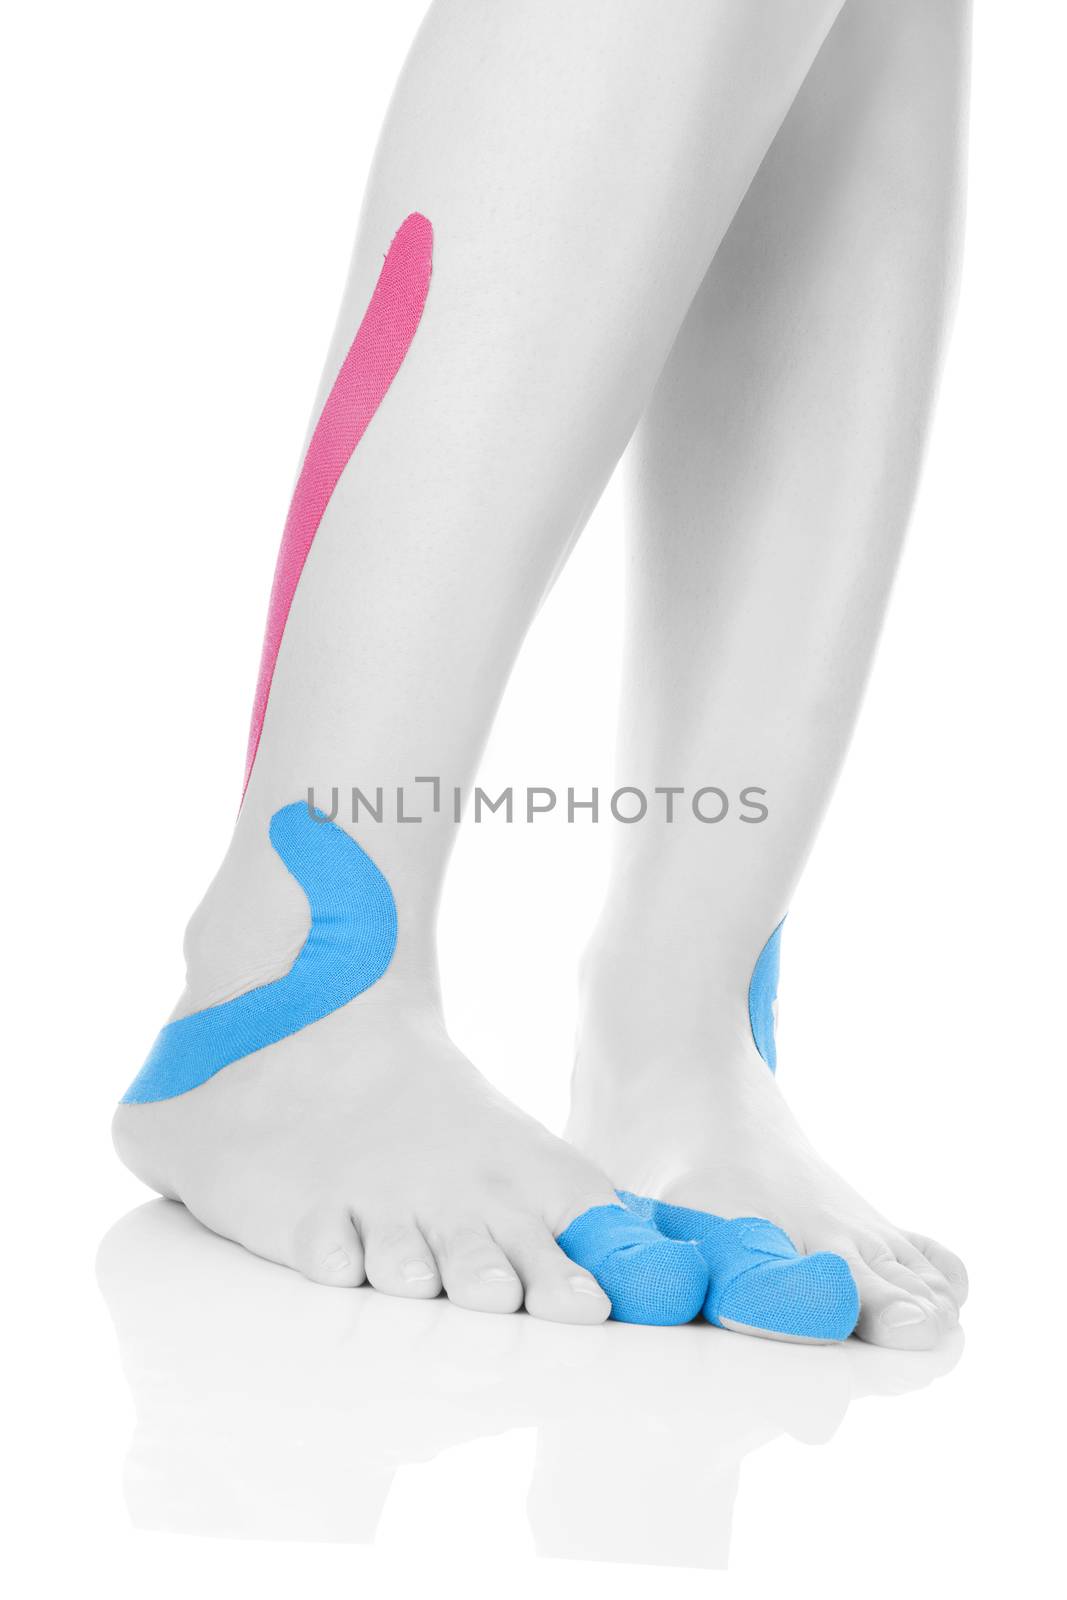 Therapeutic tape on female feet isolated on white background. Chronic pain, alternative medicine. Rehabilitation and physiotherapy.